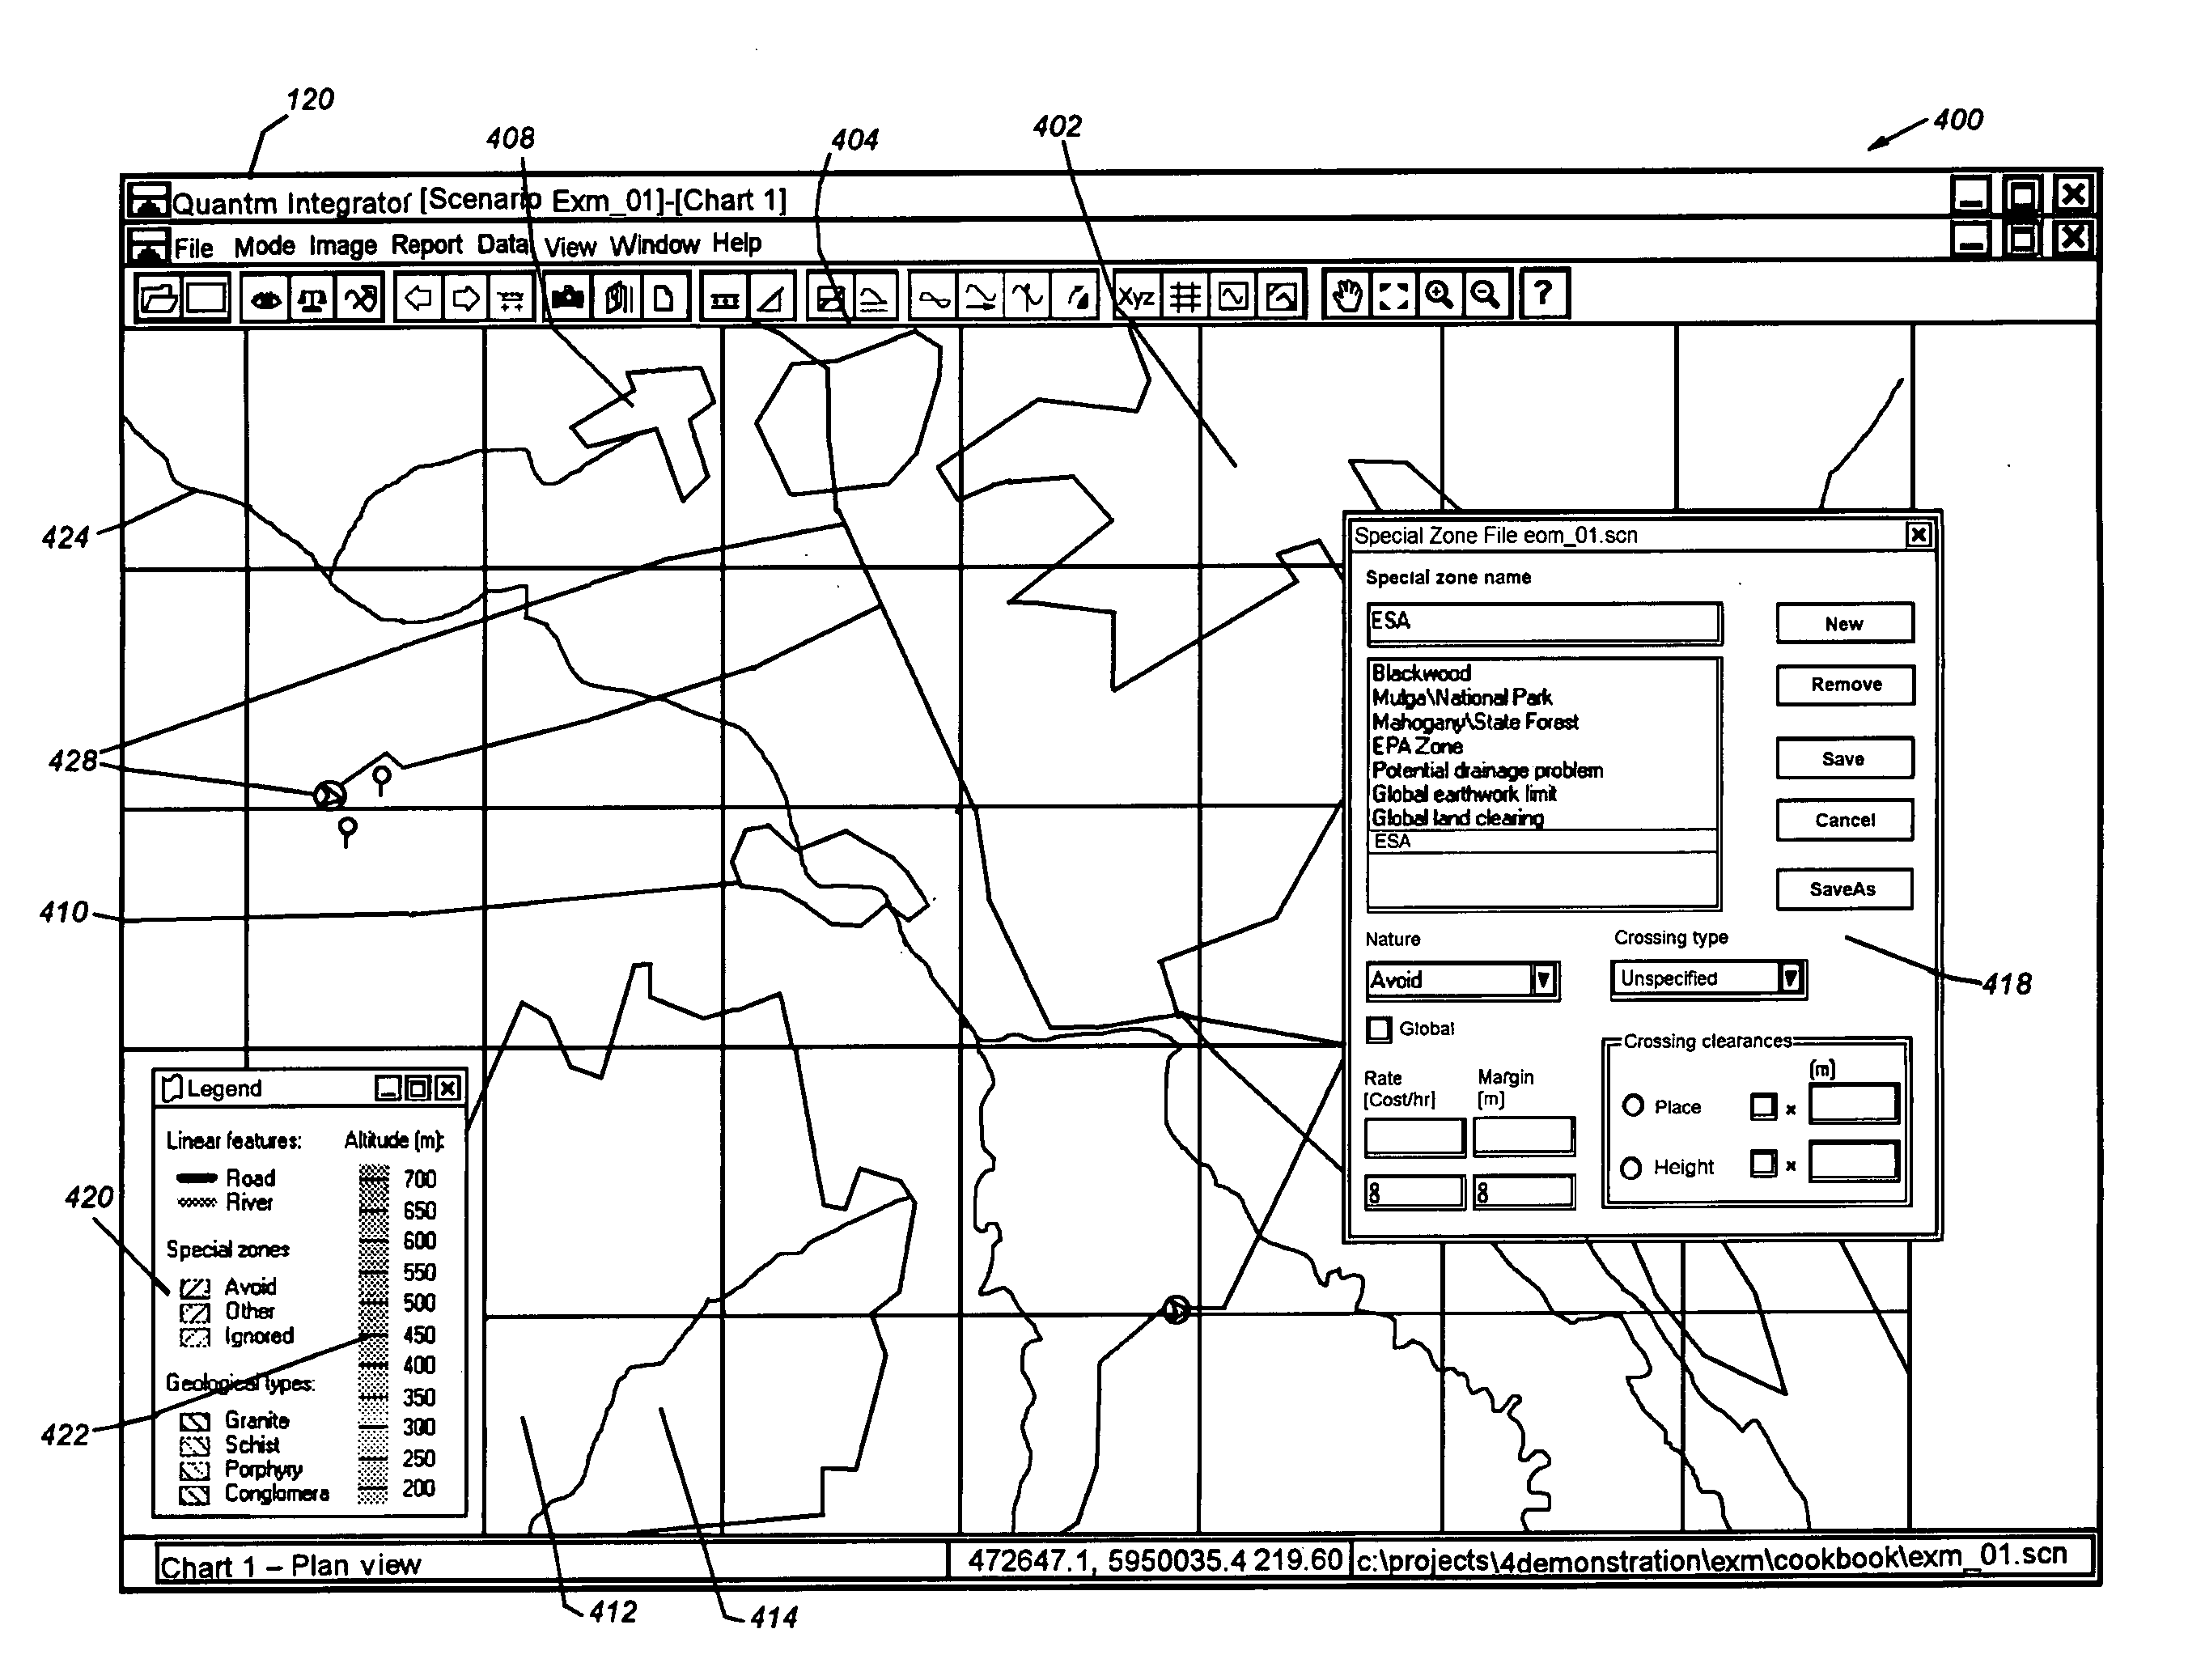 User interface for path determination system